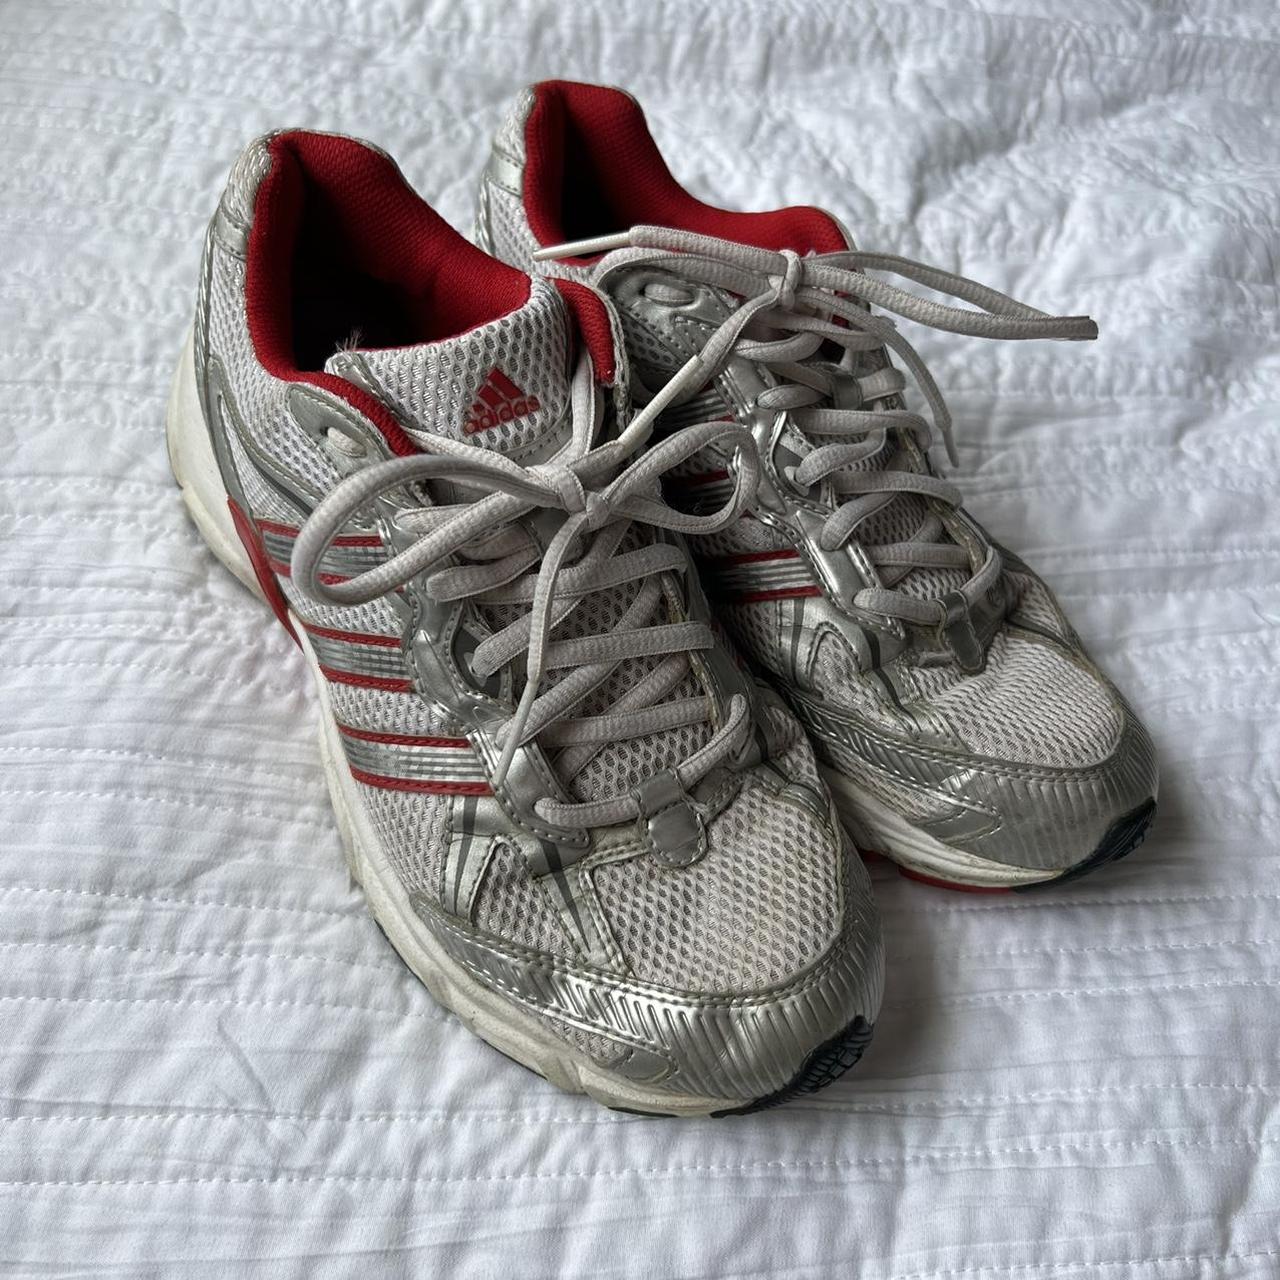 Y2k sporty adidas tennis sneakers with silver and... - Depop